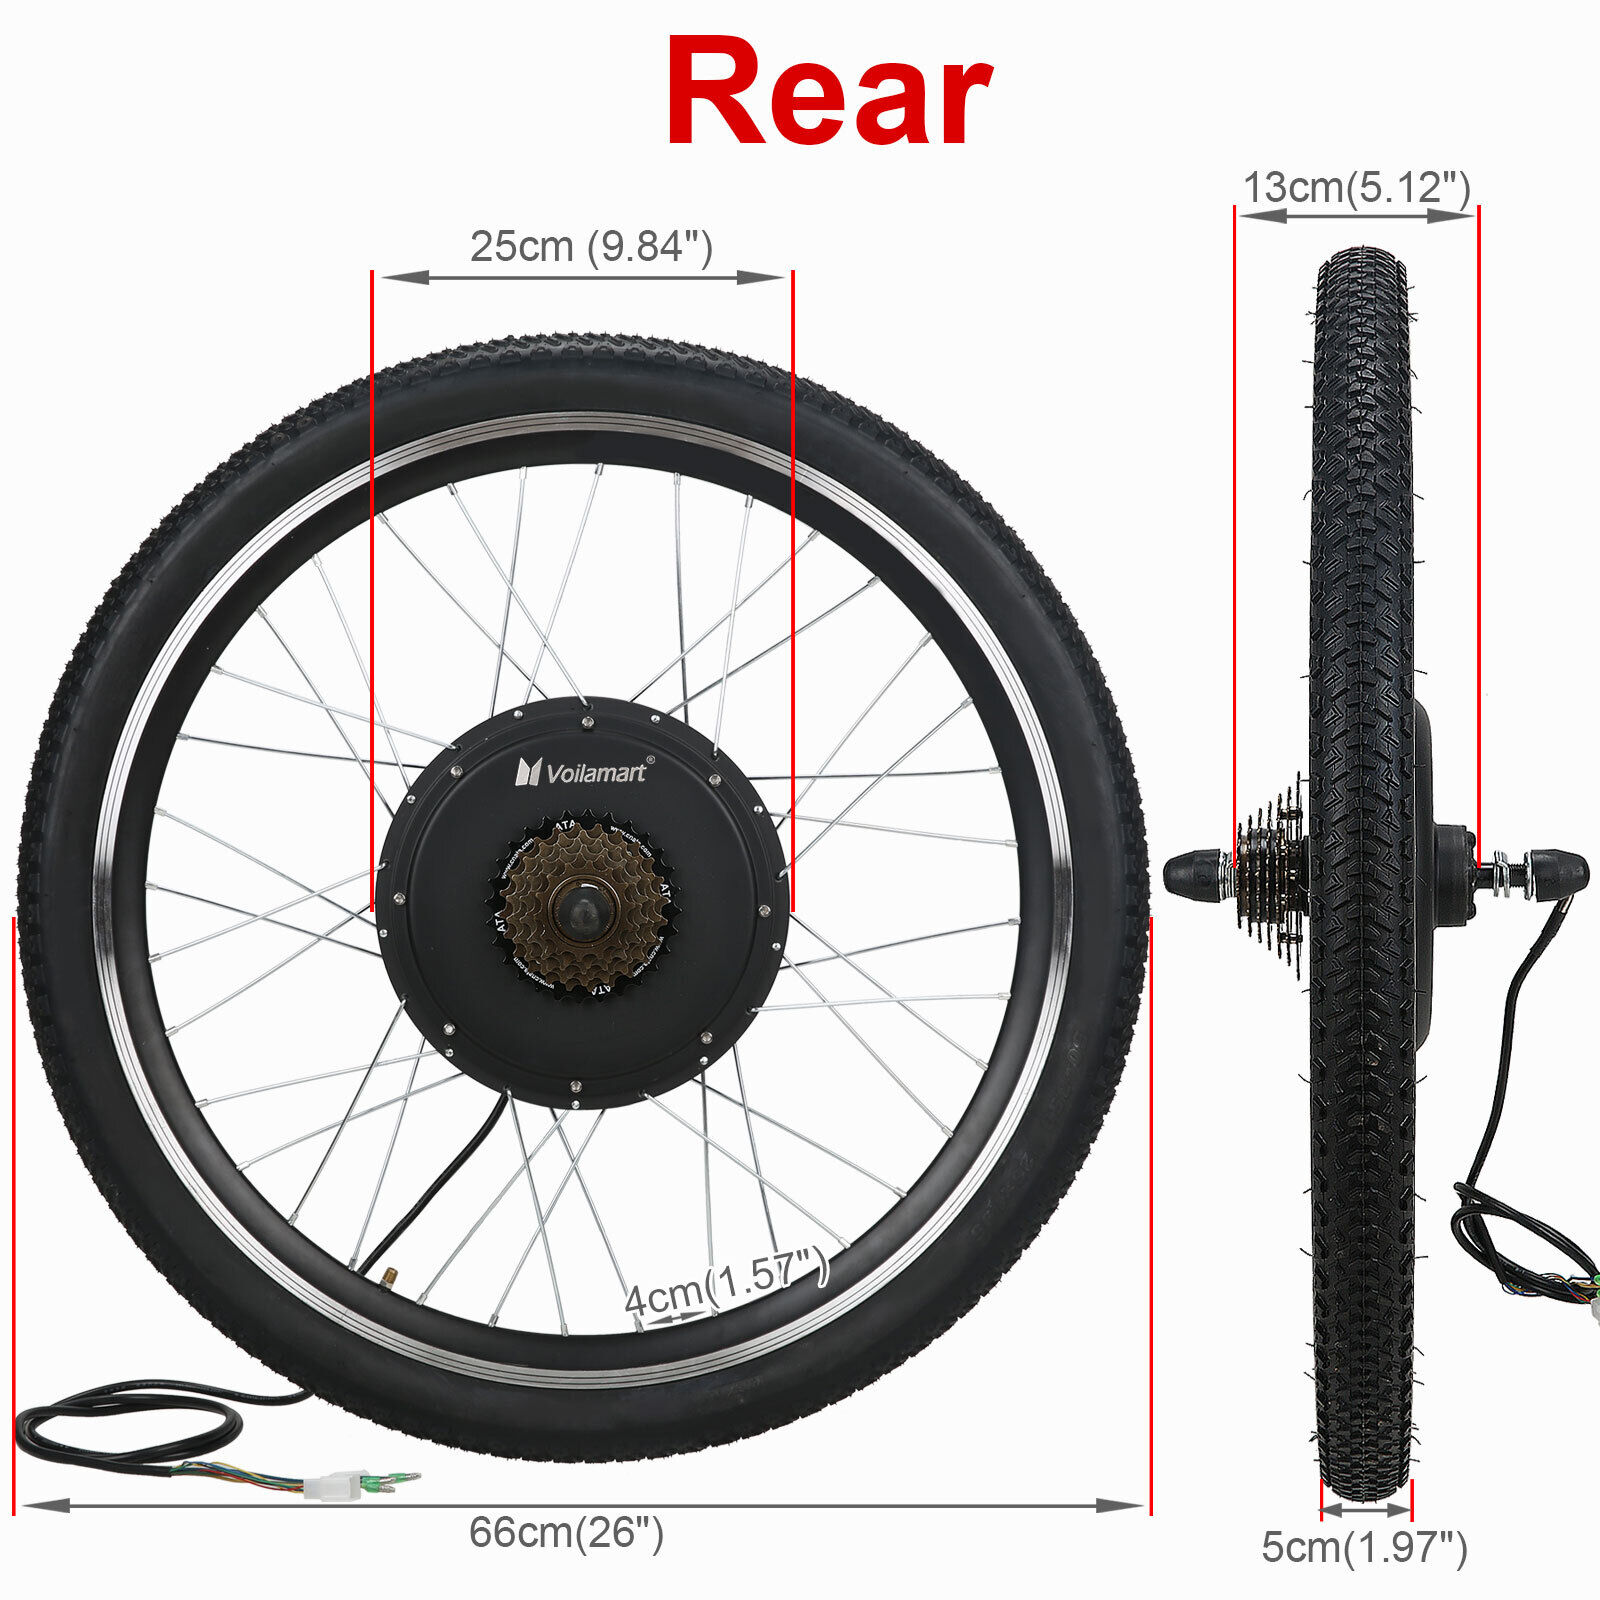 Voilamart 26" Electric Bicycle Motor Conversion Kit E Bike LCD Meter Hub Battery Voilamart Does not apply - фотография #4